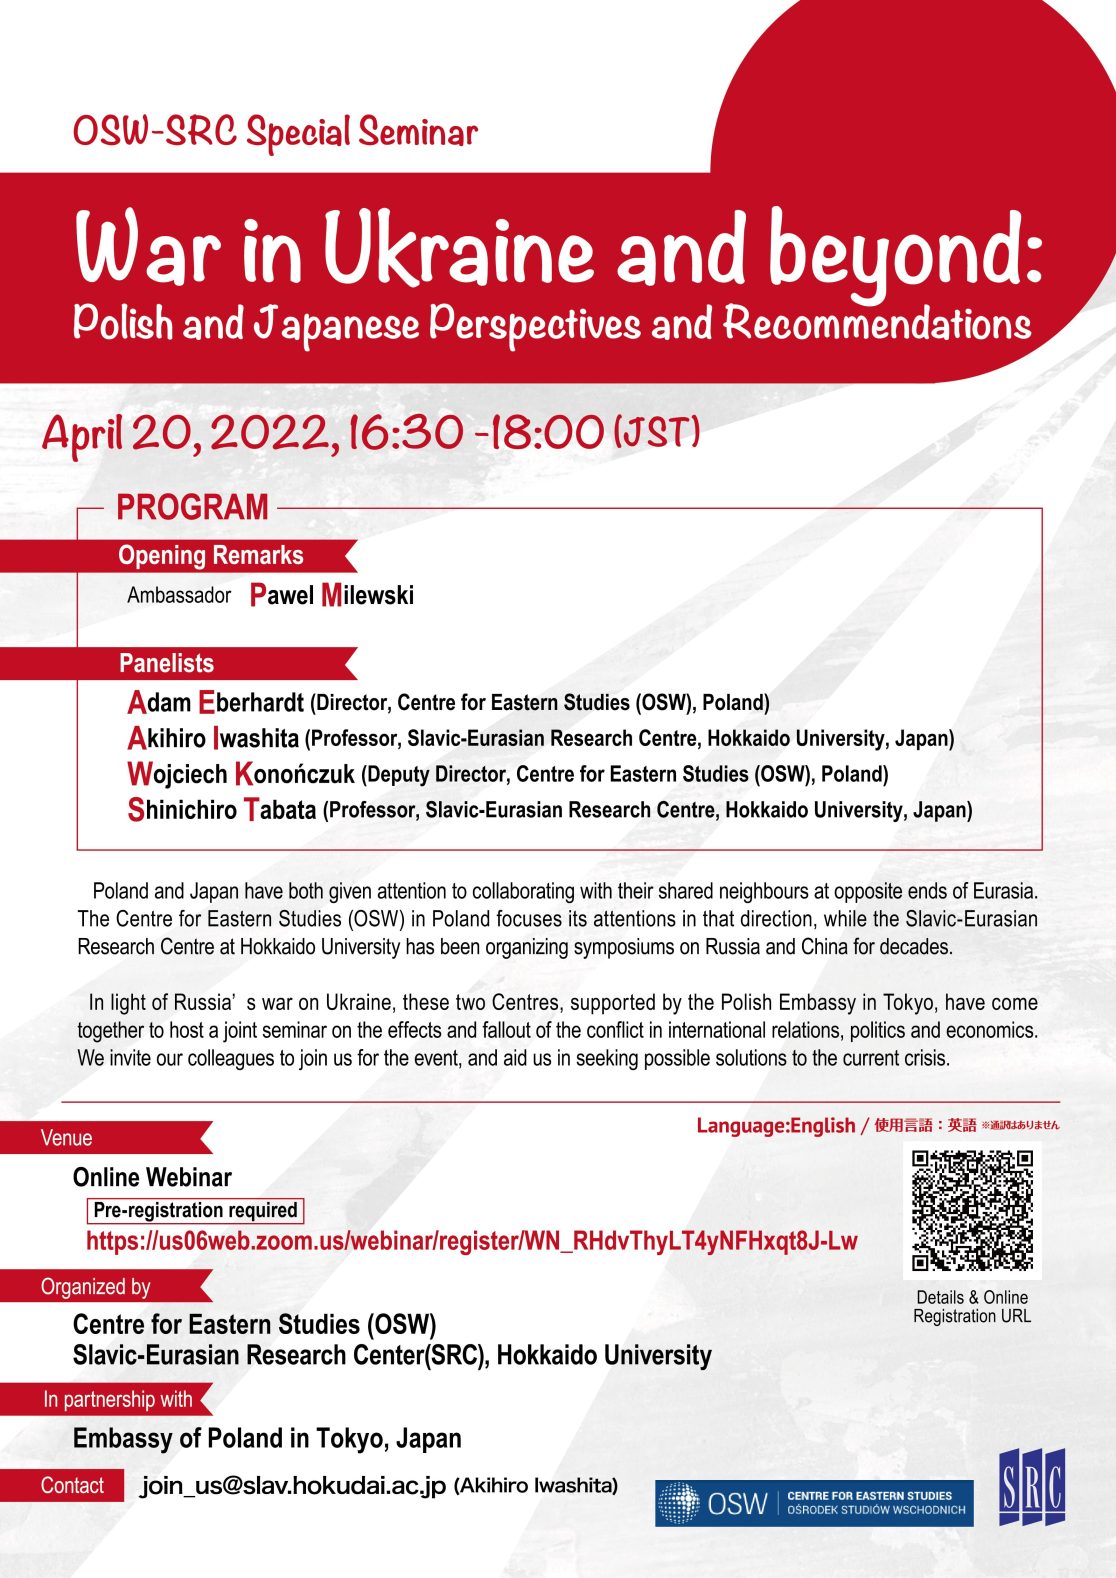 OSW-SRC Special Seminar “War in Ukraine and beyond: Polish and Japanese Perspectives and Recommendations”